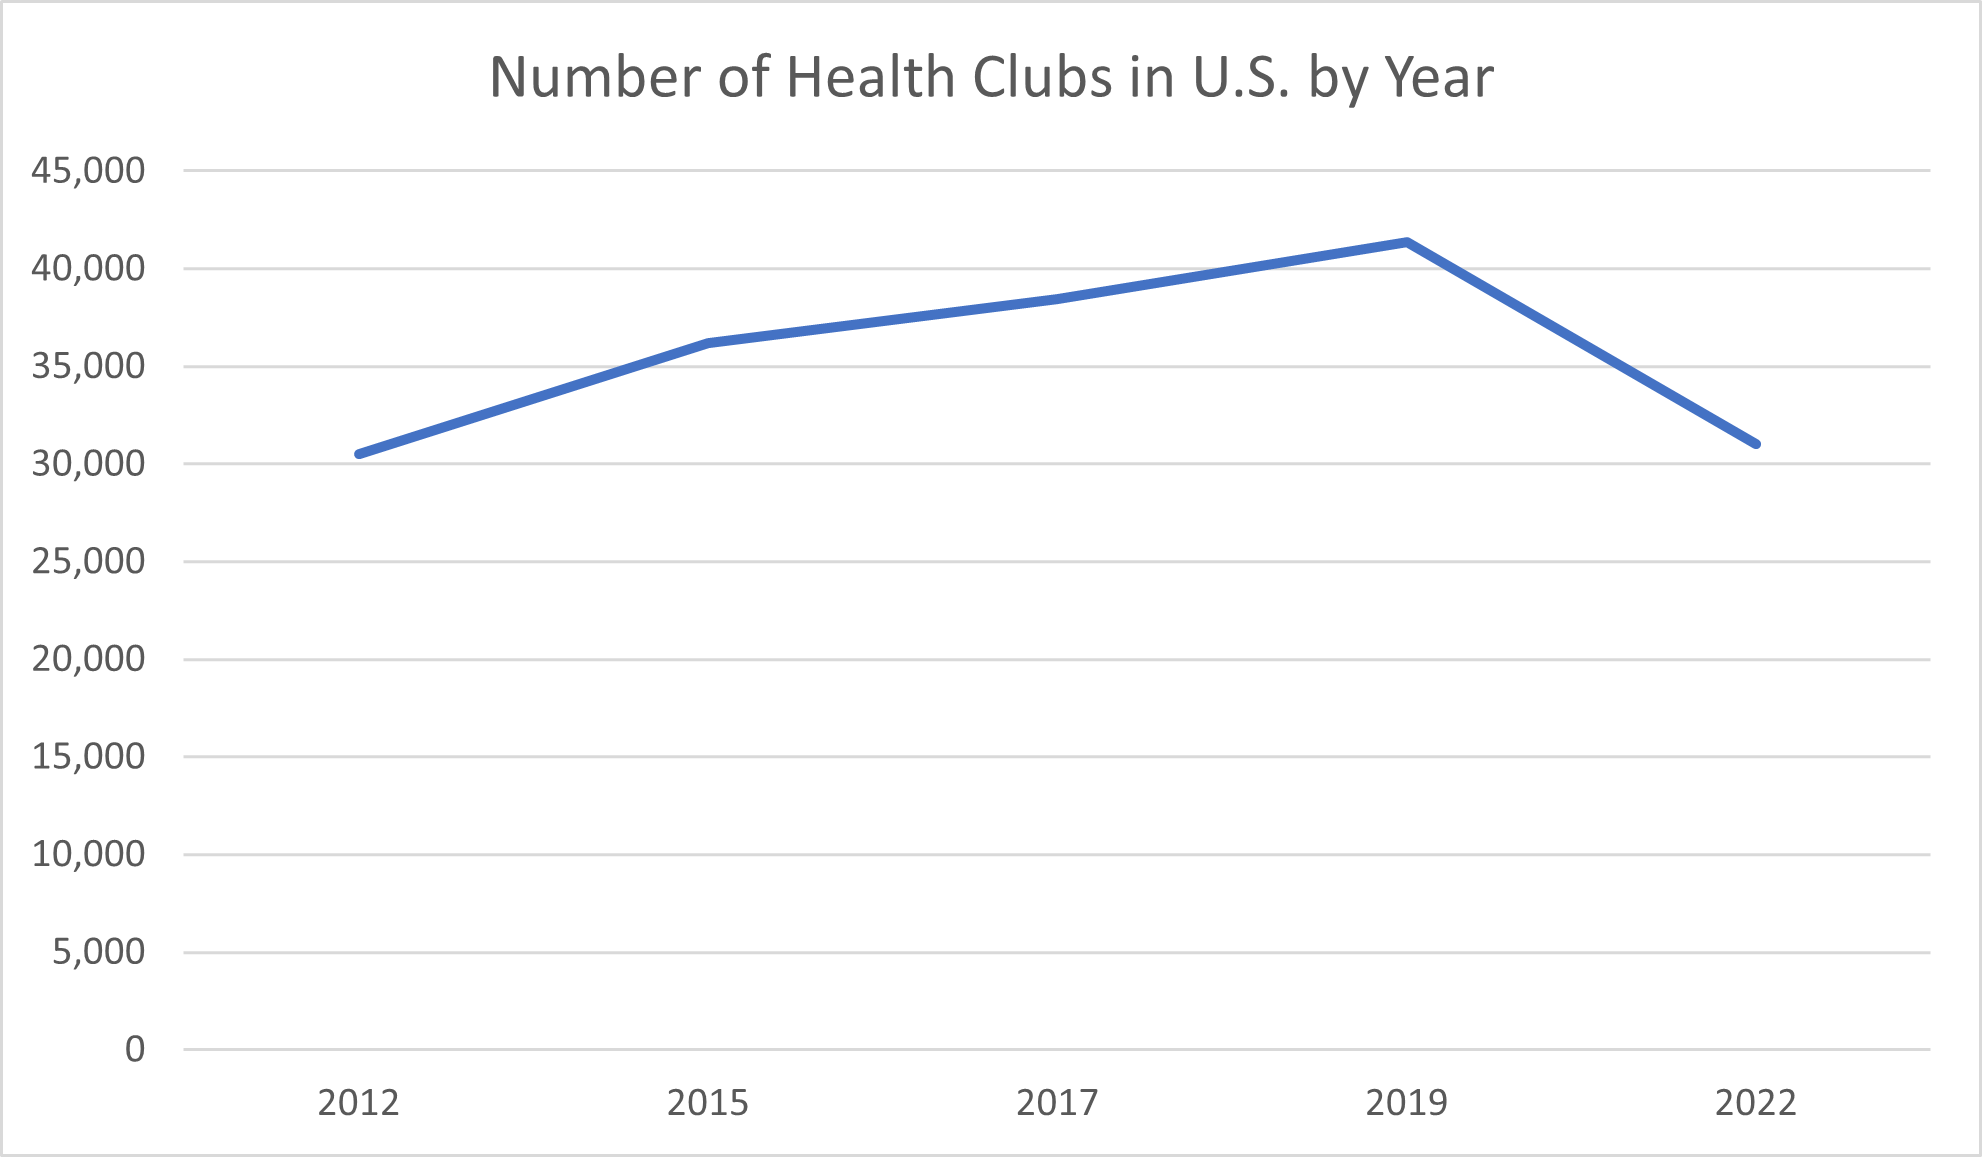 Number of gyms in the U.S. 